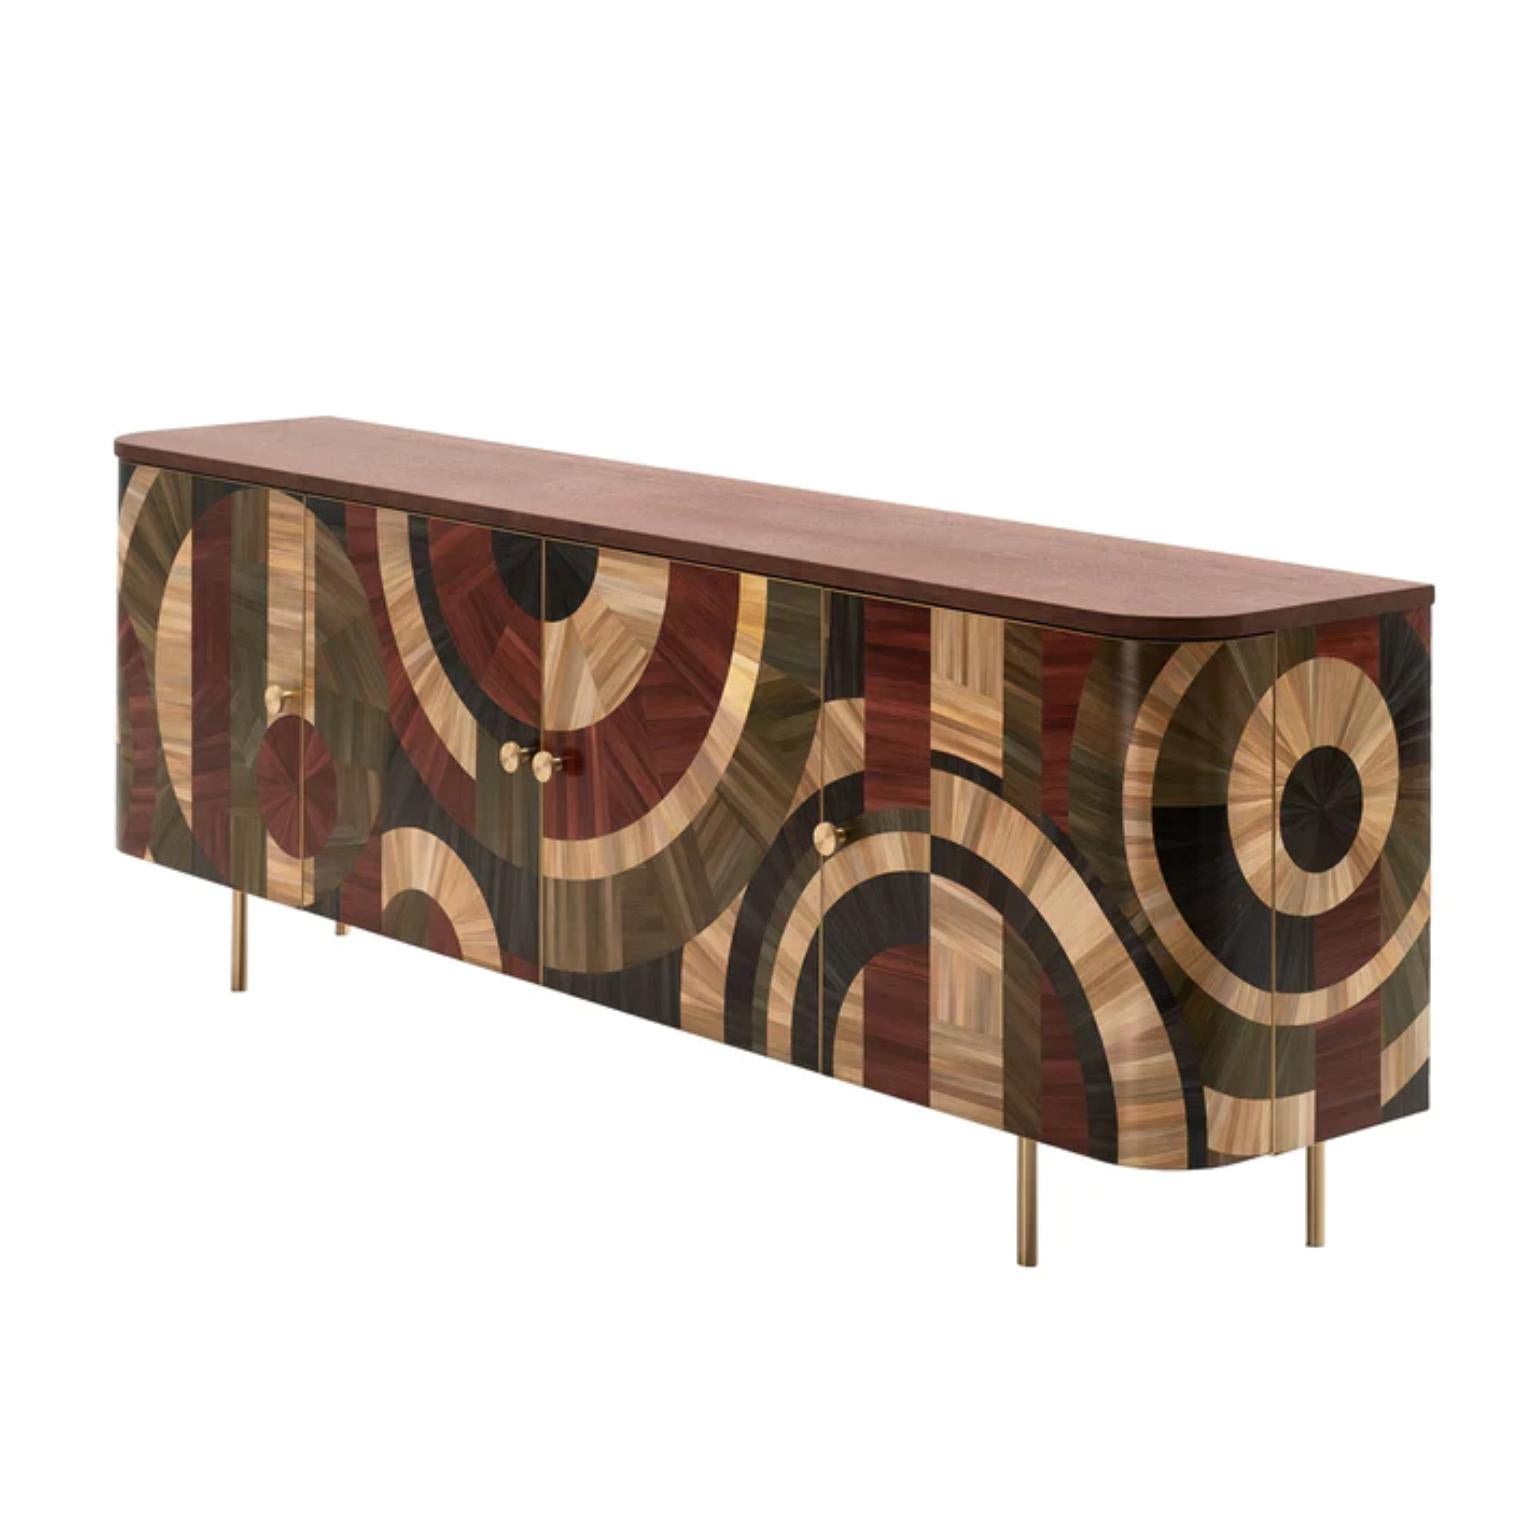 Solomia 1 Cabinet by Ruda Studio
Dimensions: D 45 x W 170 x H 75 cm.
Materials: Solid wood (ash), rye straw inlay, plywood and brass.
Weight: 70 kg.

Dimensions are customizable. Please contact us. 

Inspired by the wealth of Ukrainian land, RUDA